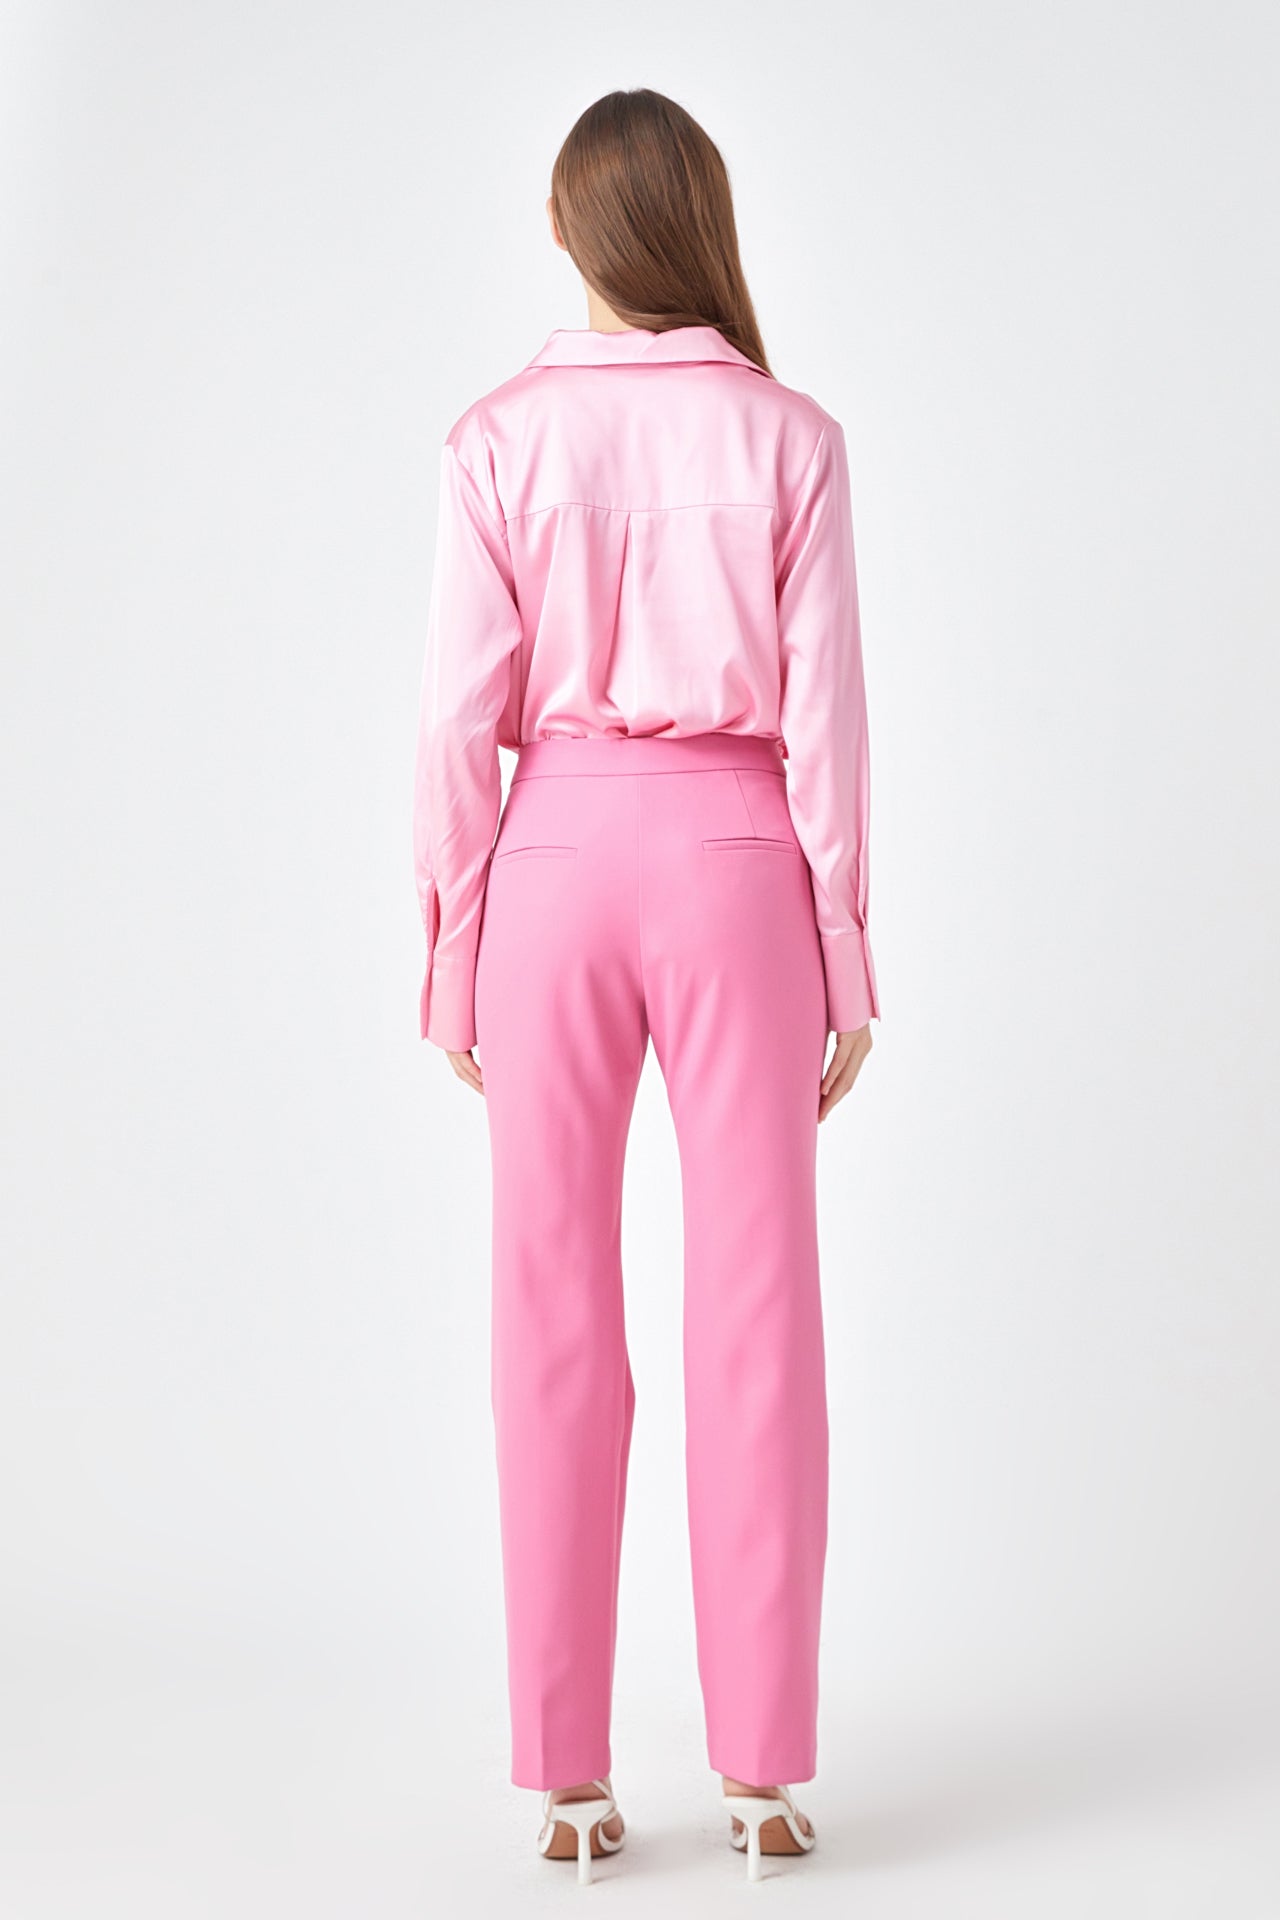 ENDLESS ROSE - Full Length Low Rise Pants - PANTS available at Objectrare